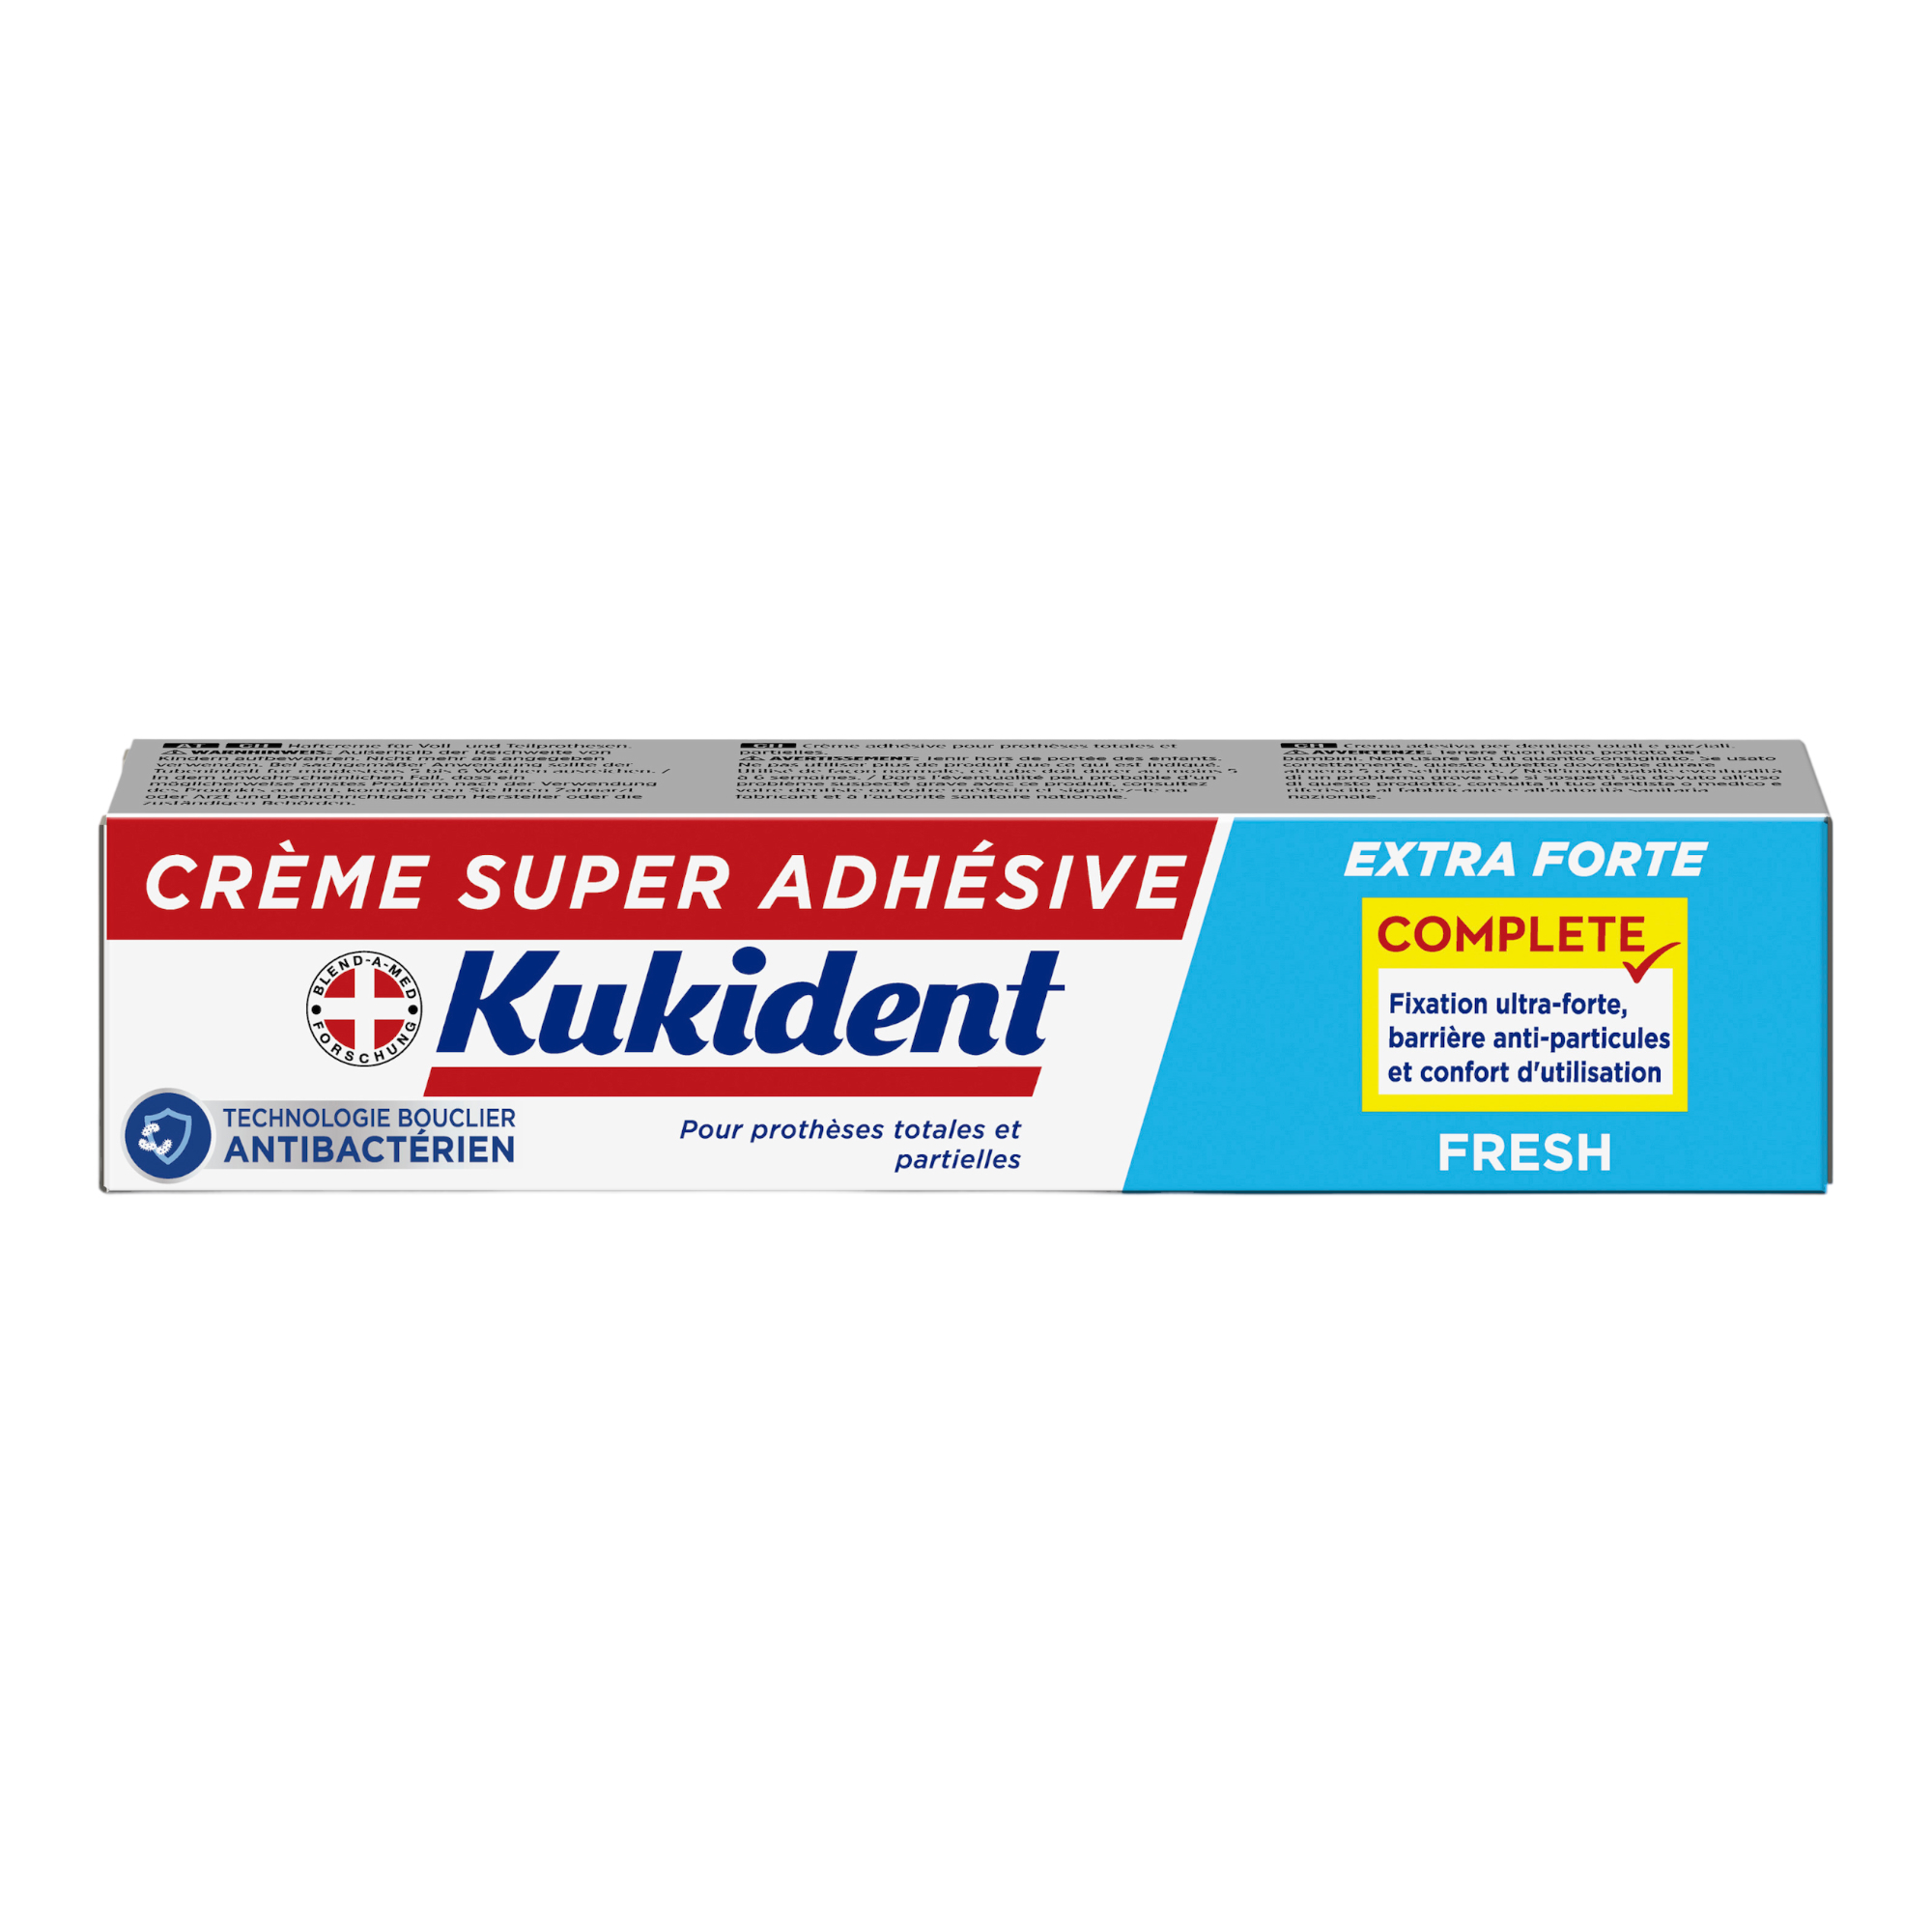 Kukident Cleaning Tabs Comp Lasting Freshness 112 pcs